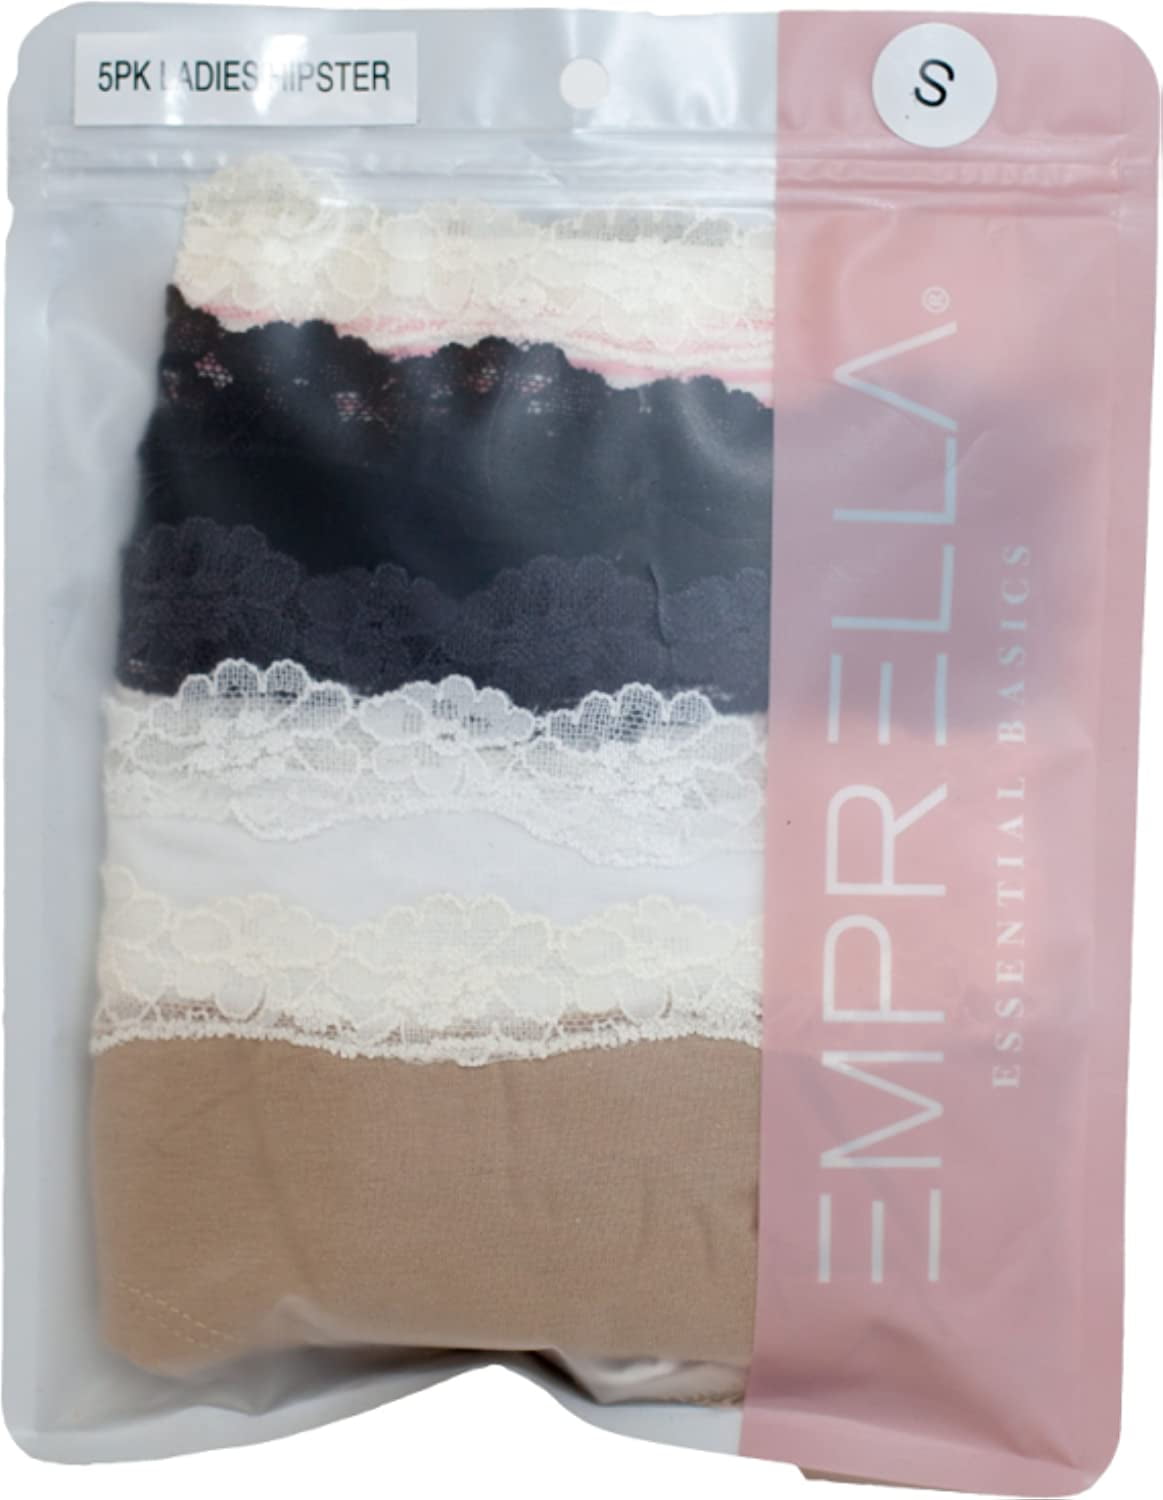 Emprella Women's Underwear Hipster Panties - 5 Pack Colors and Patterns May  Vary Small - 4X